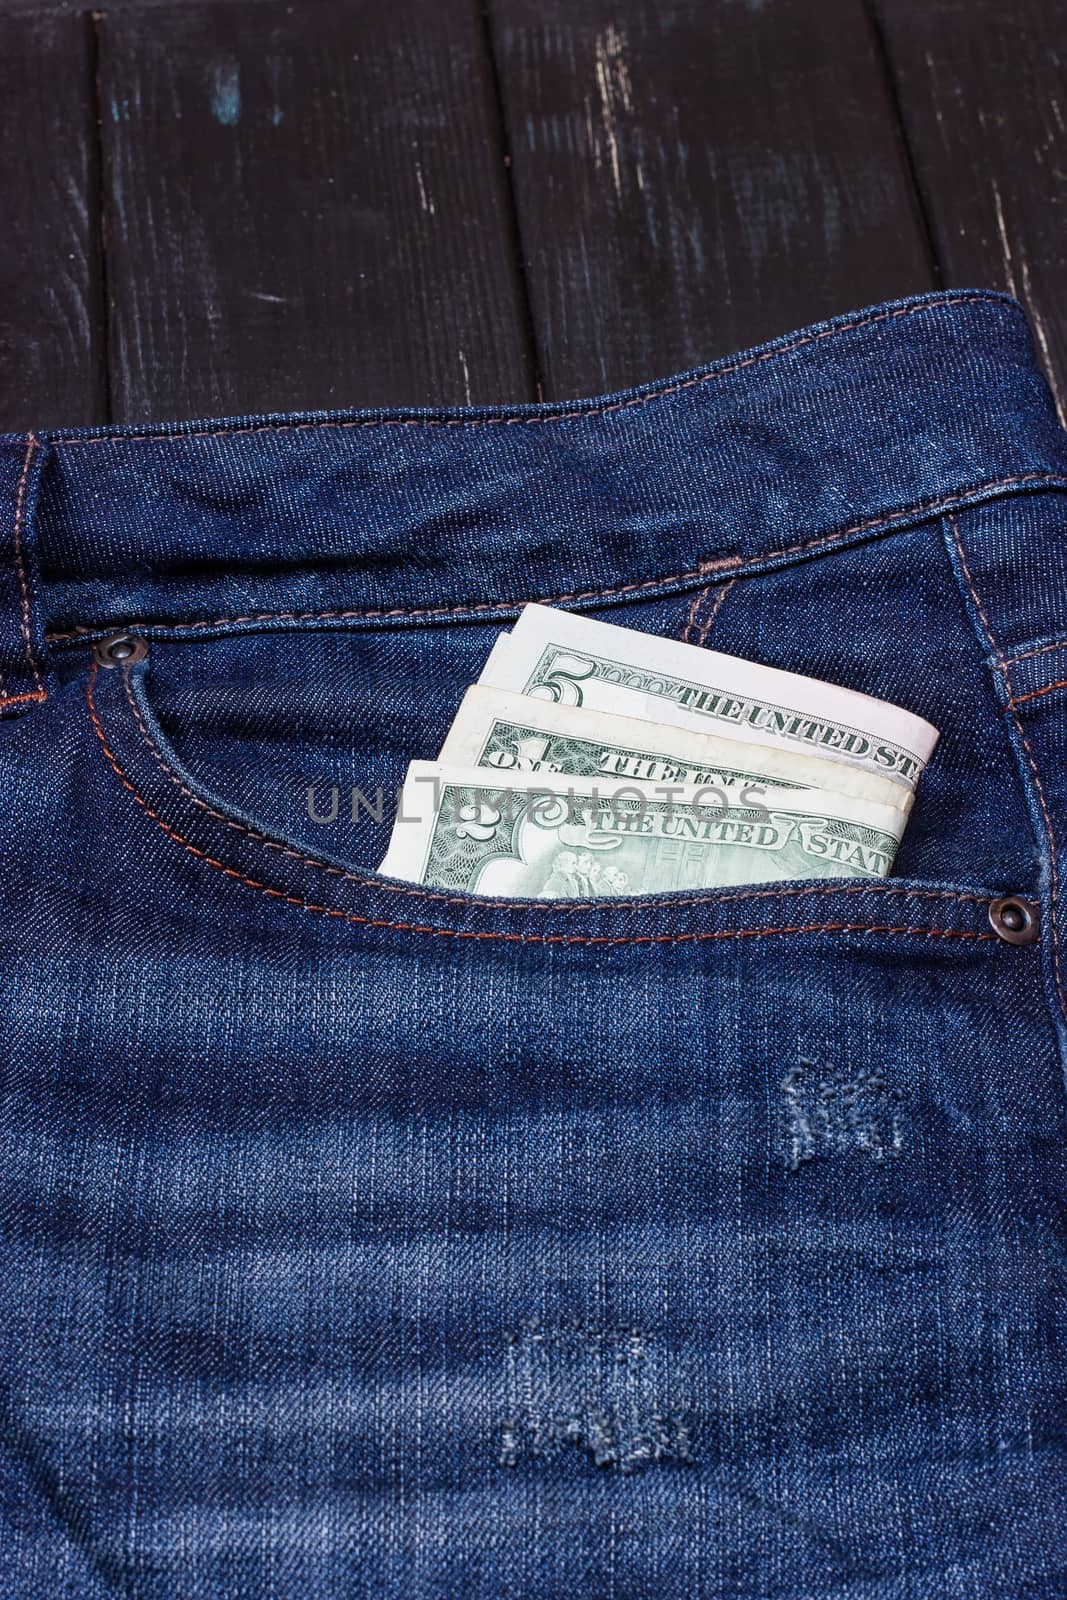 dollars in a pocket of jeans by victosha